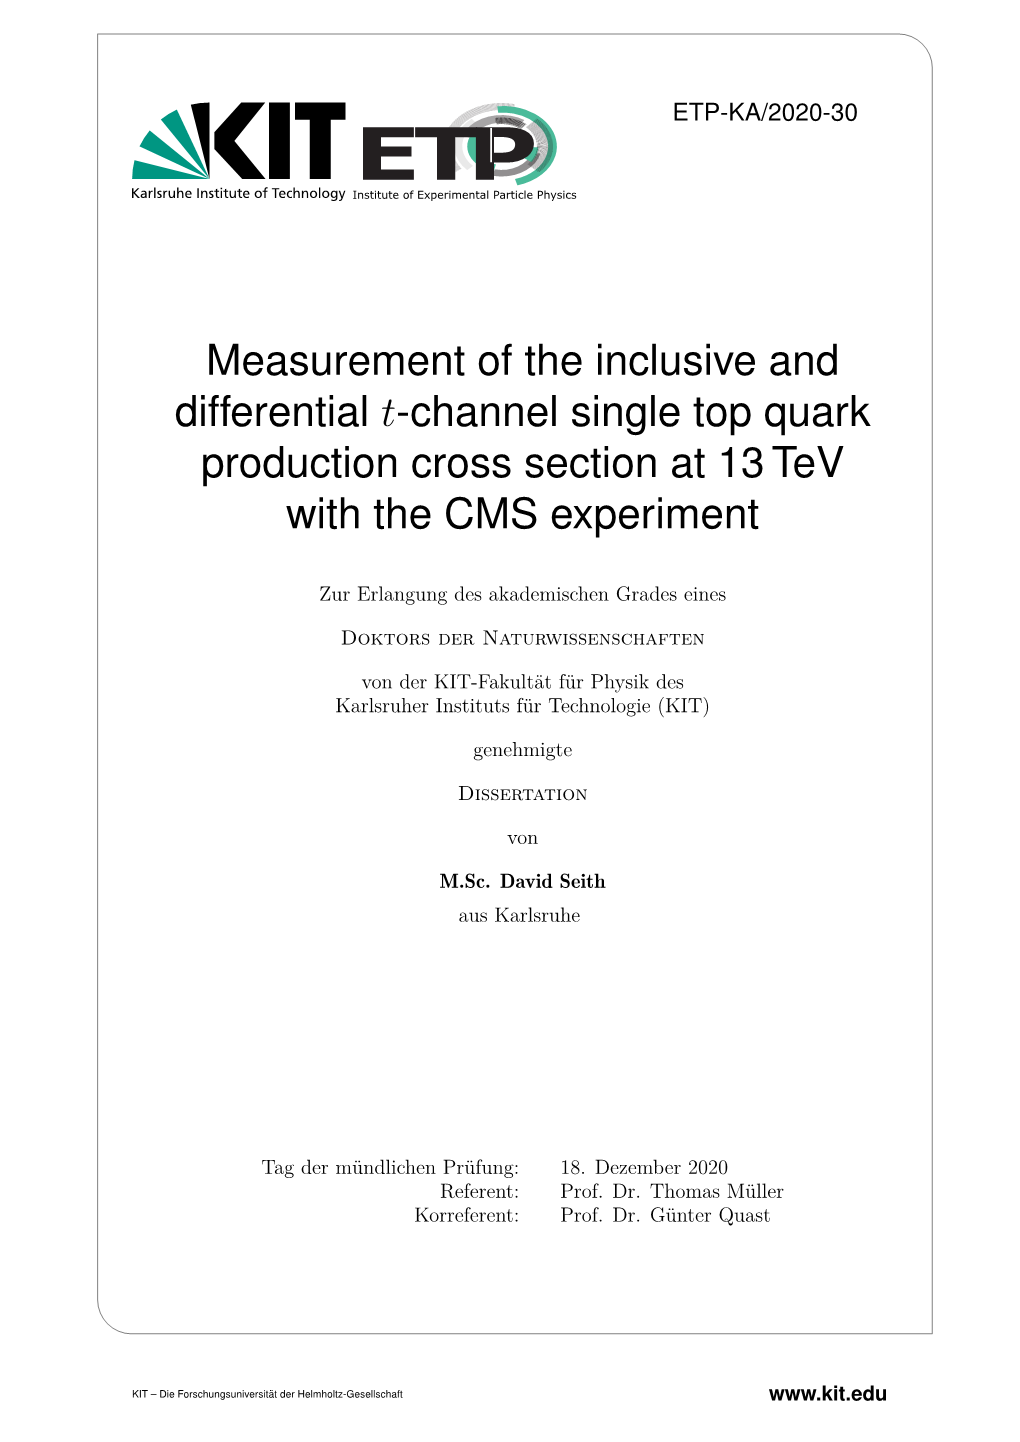 Measurement of the Inclusive and Differential T-Channel Single Top Quark Production Cross Section at 13 Tev with the CMS Experiment